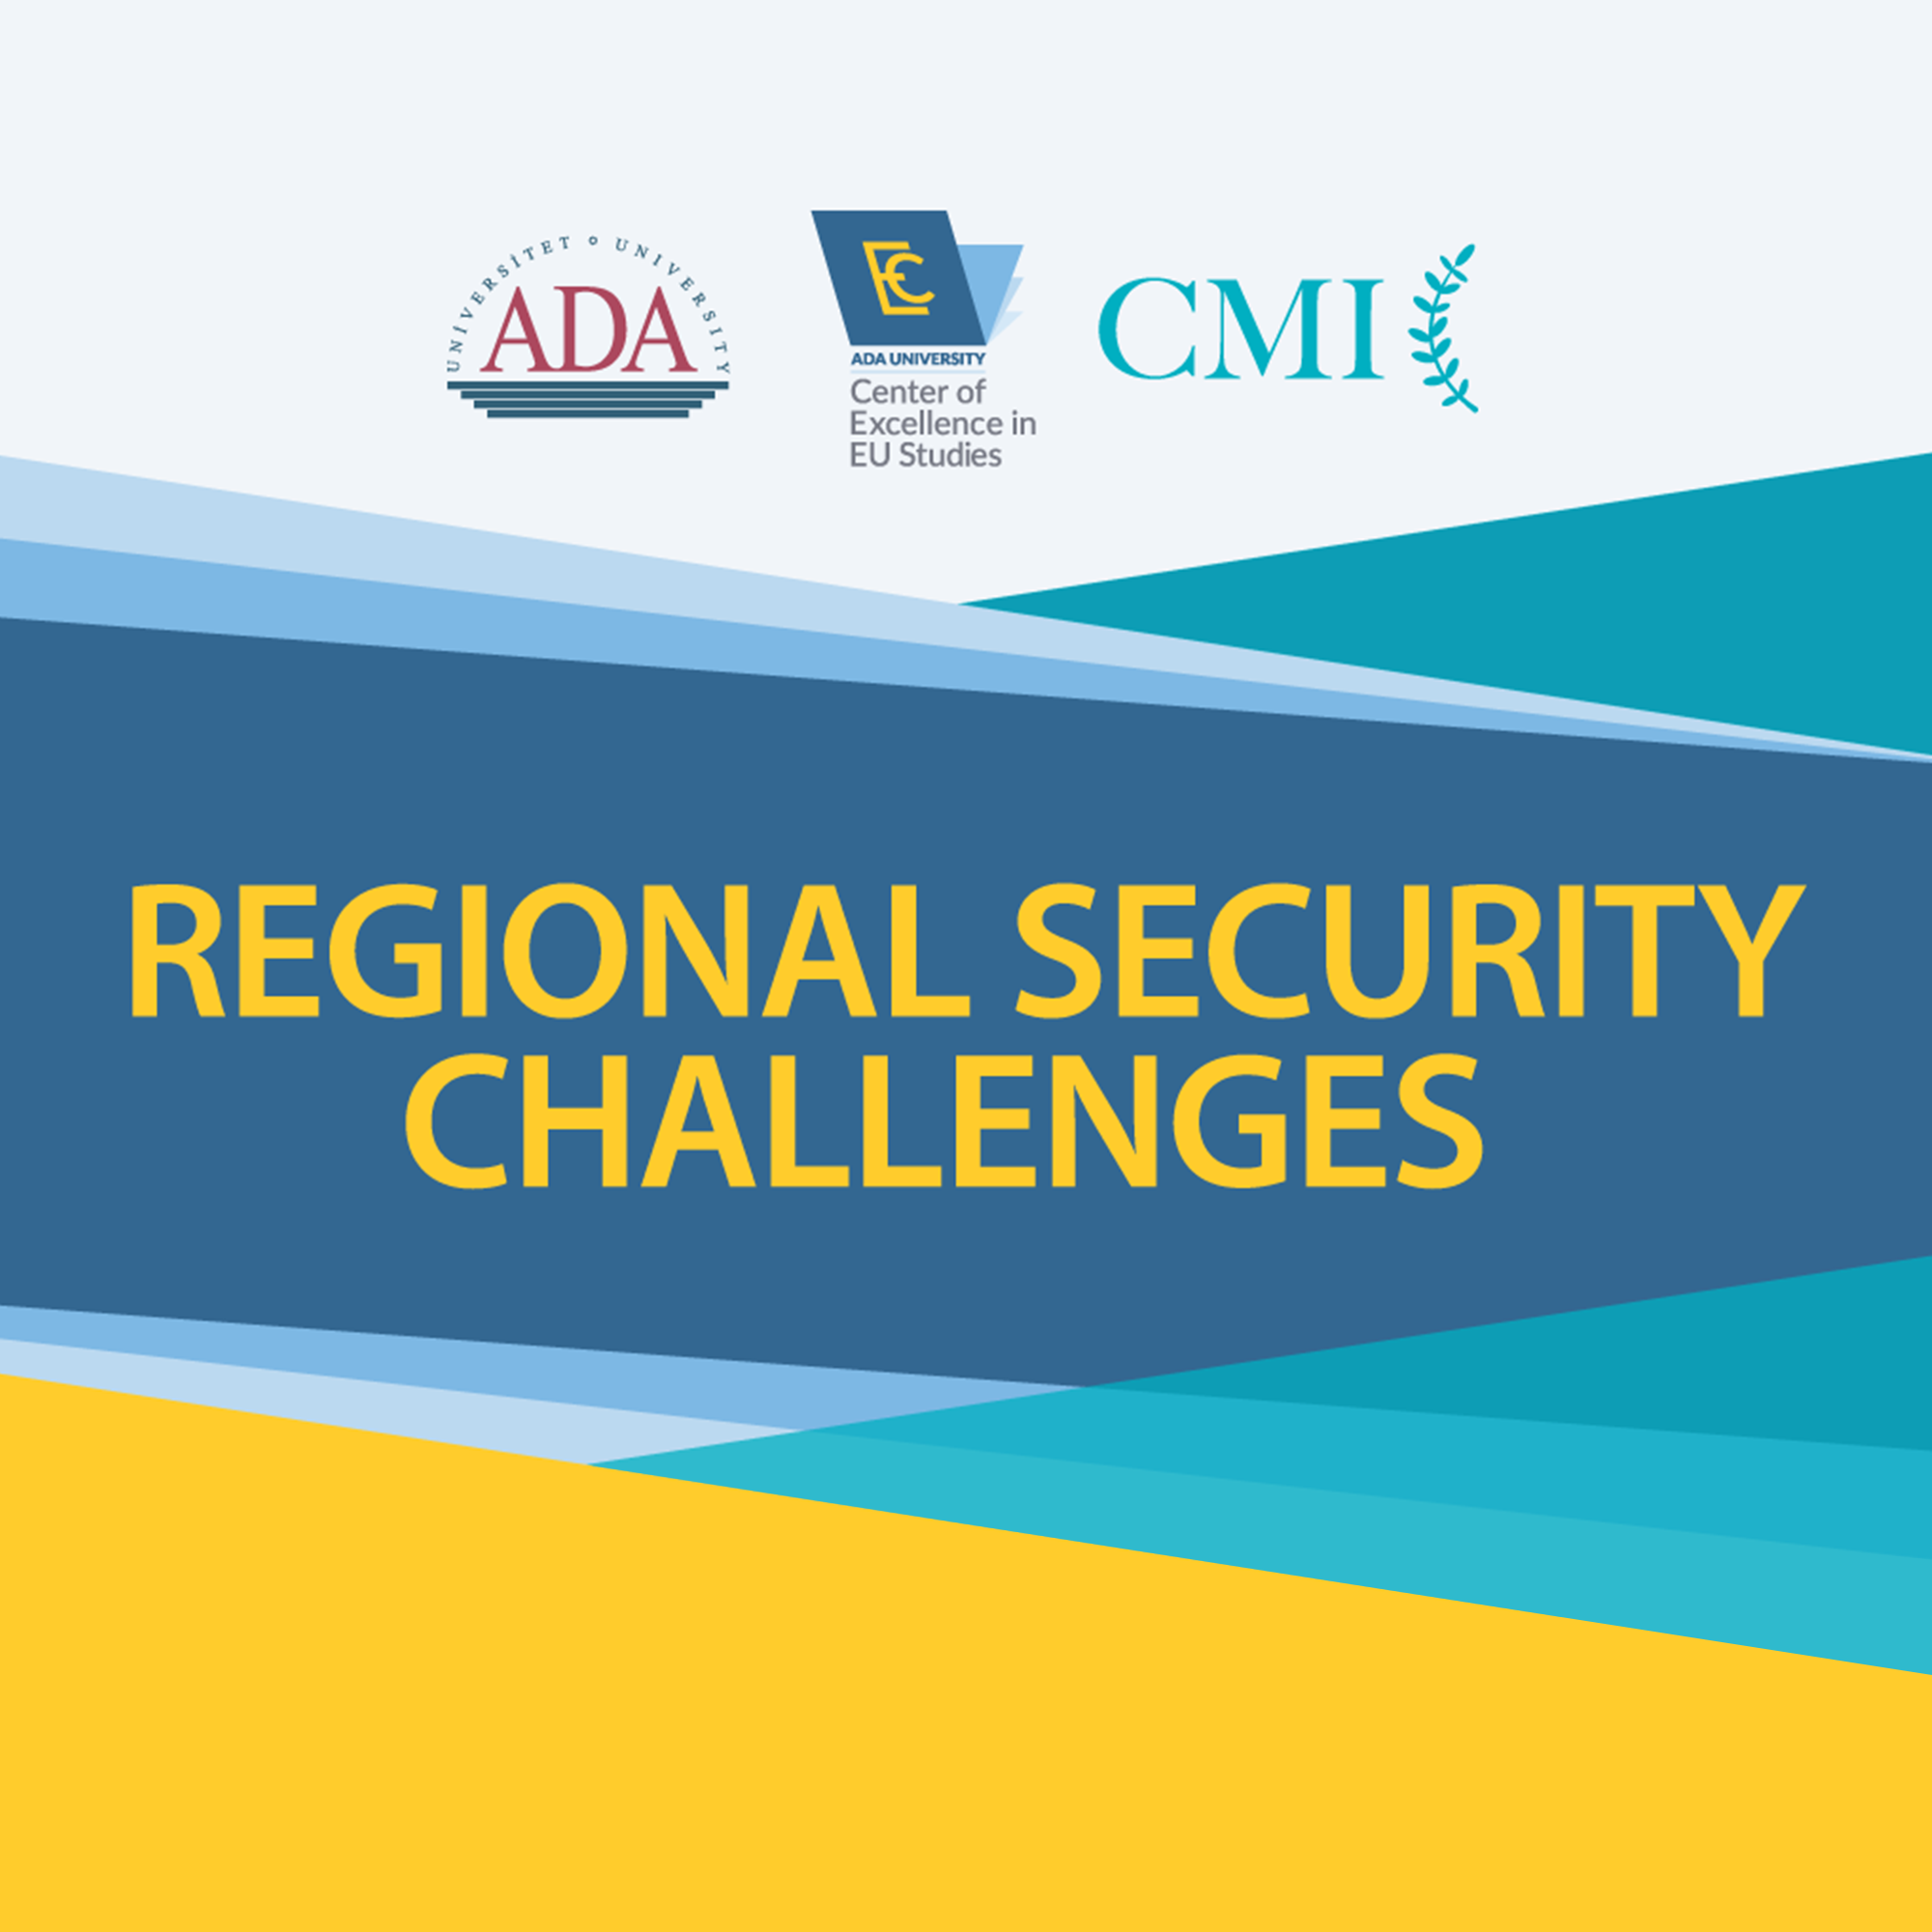 Training programme on Regional Security Challenges for government officials